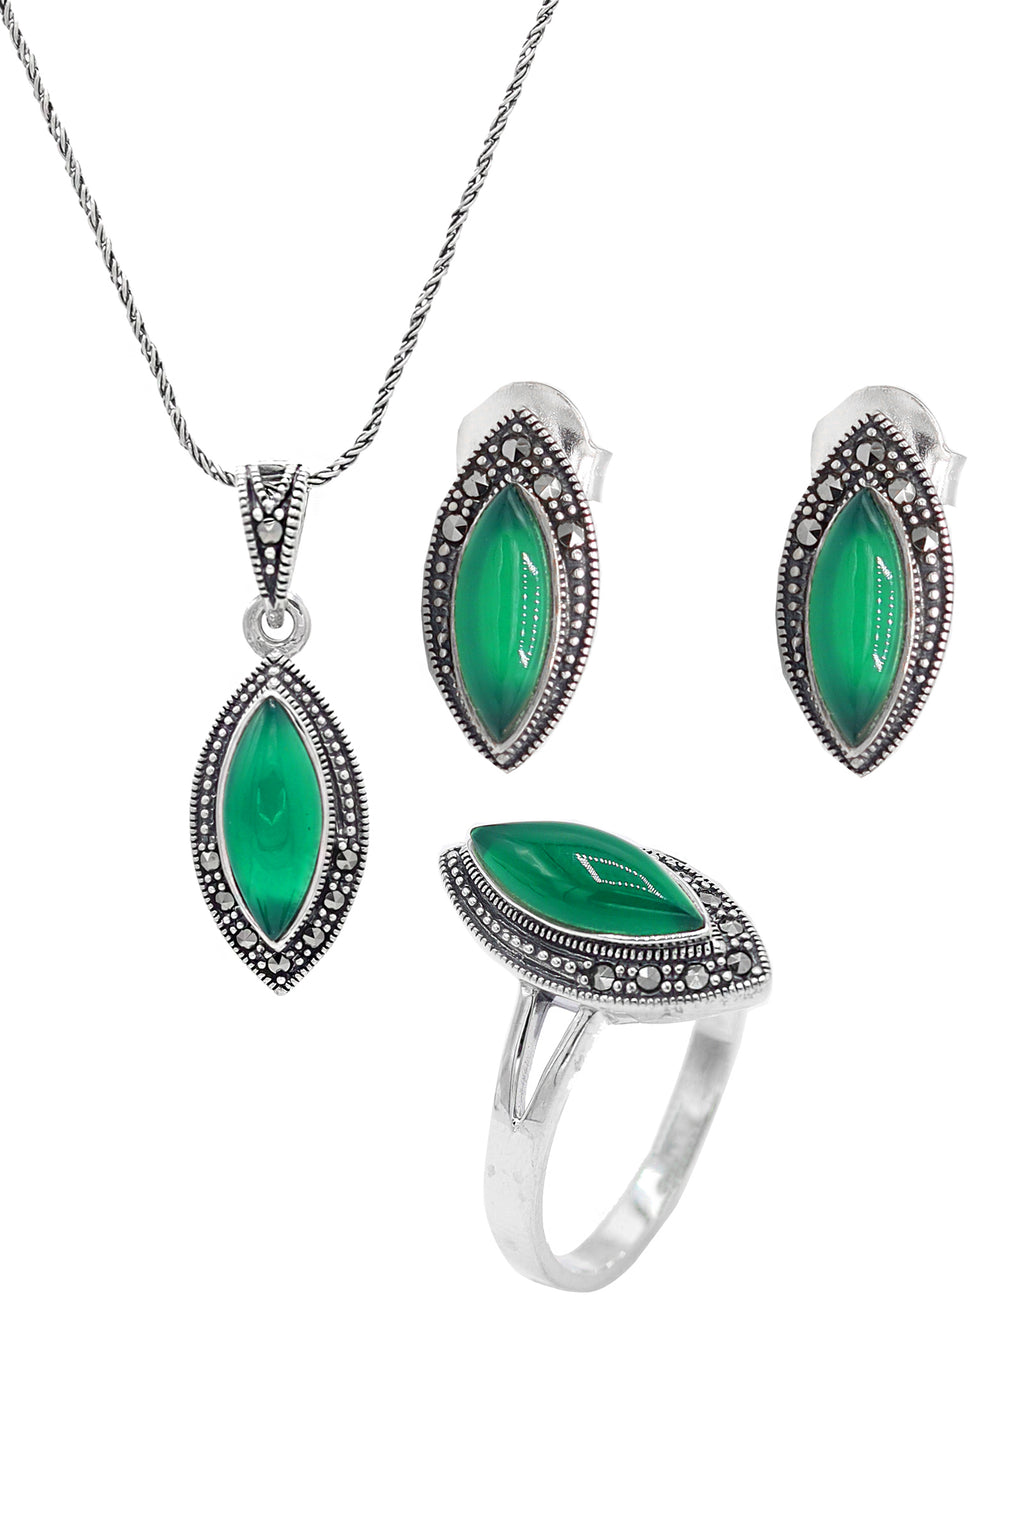 Slanting Model Silver Triple Jewelry Set With Emerald (NG201021928)